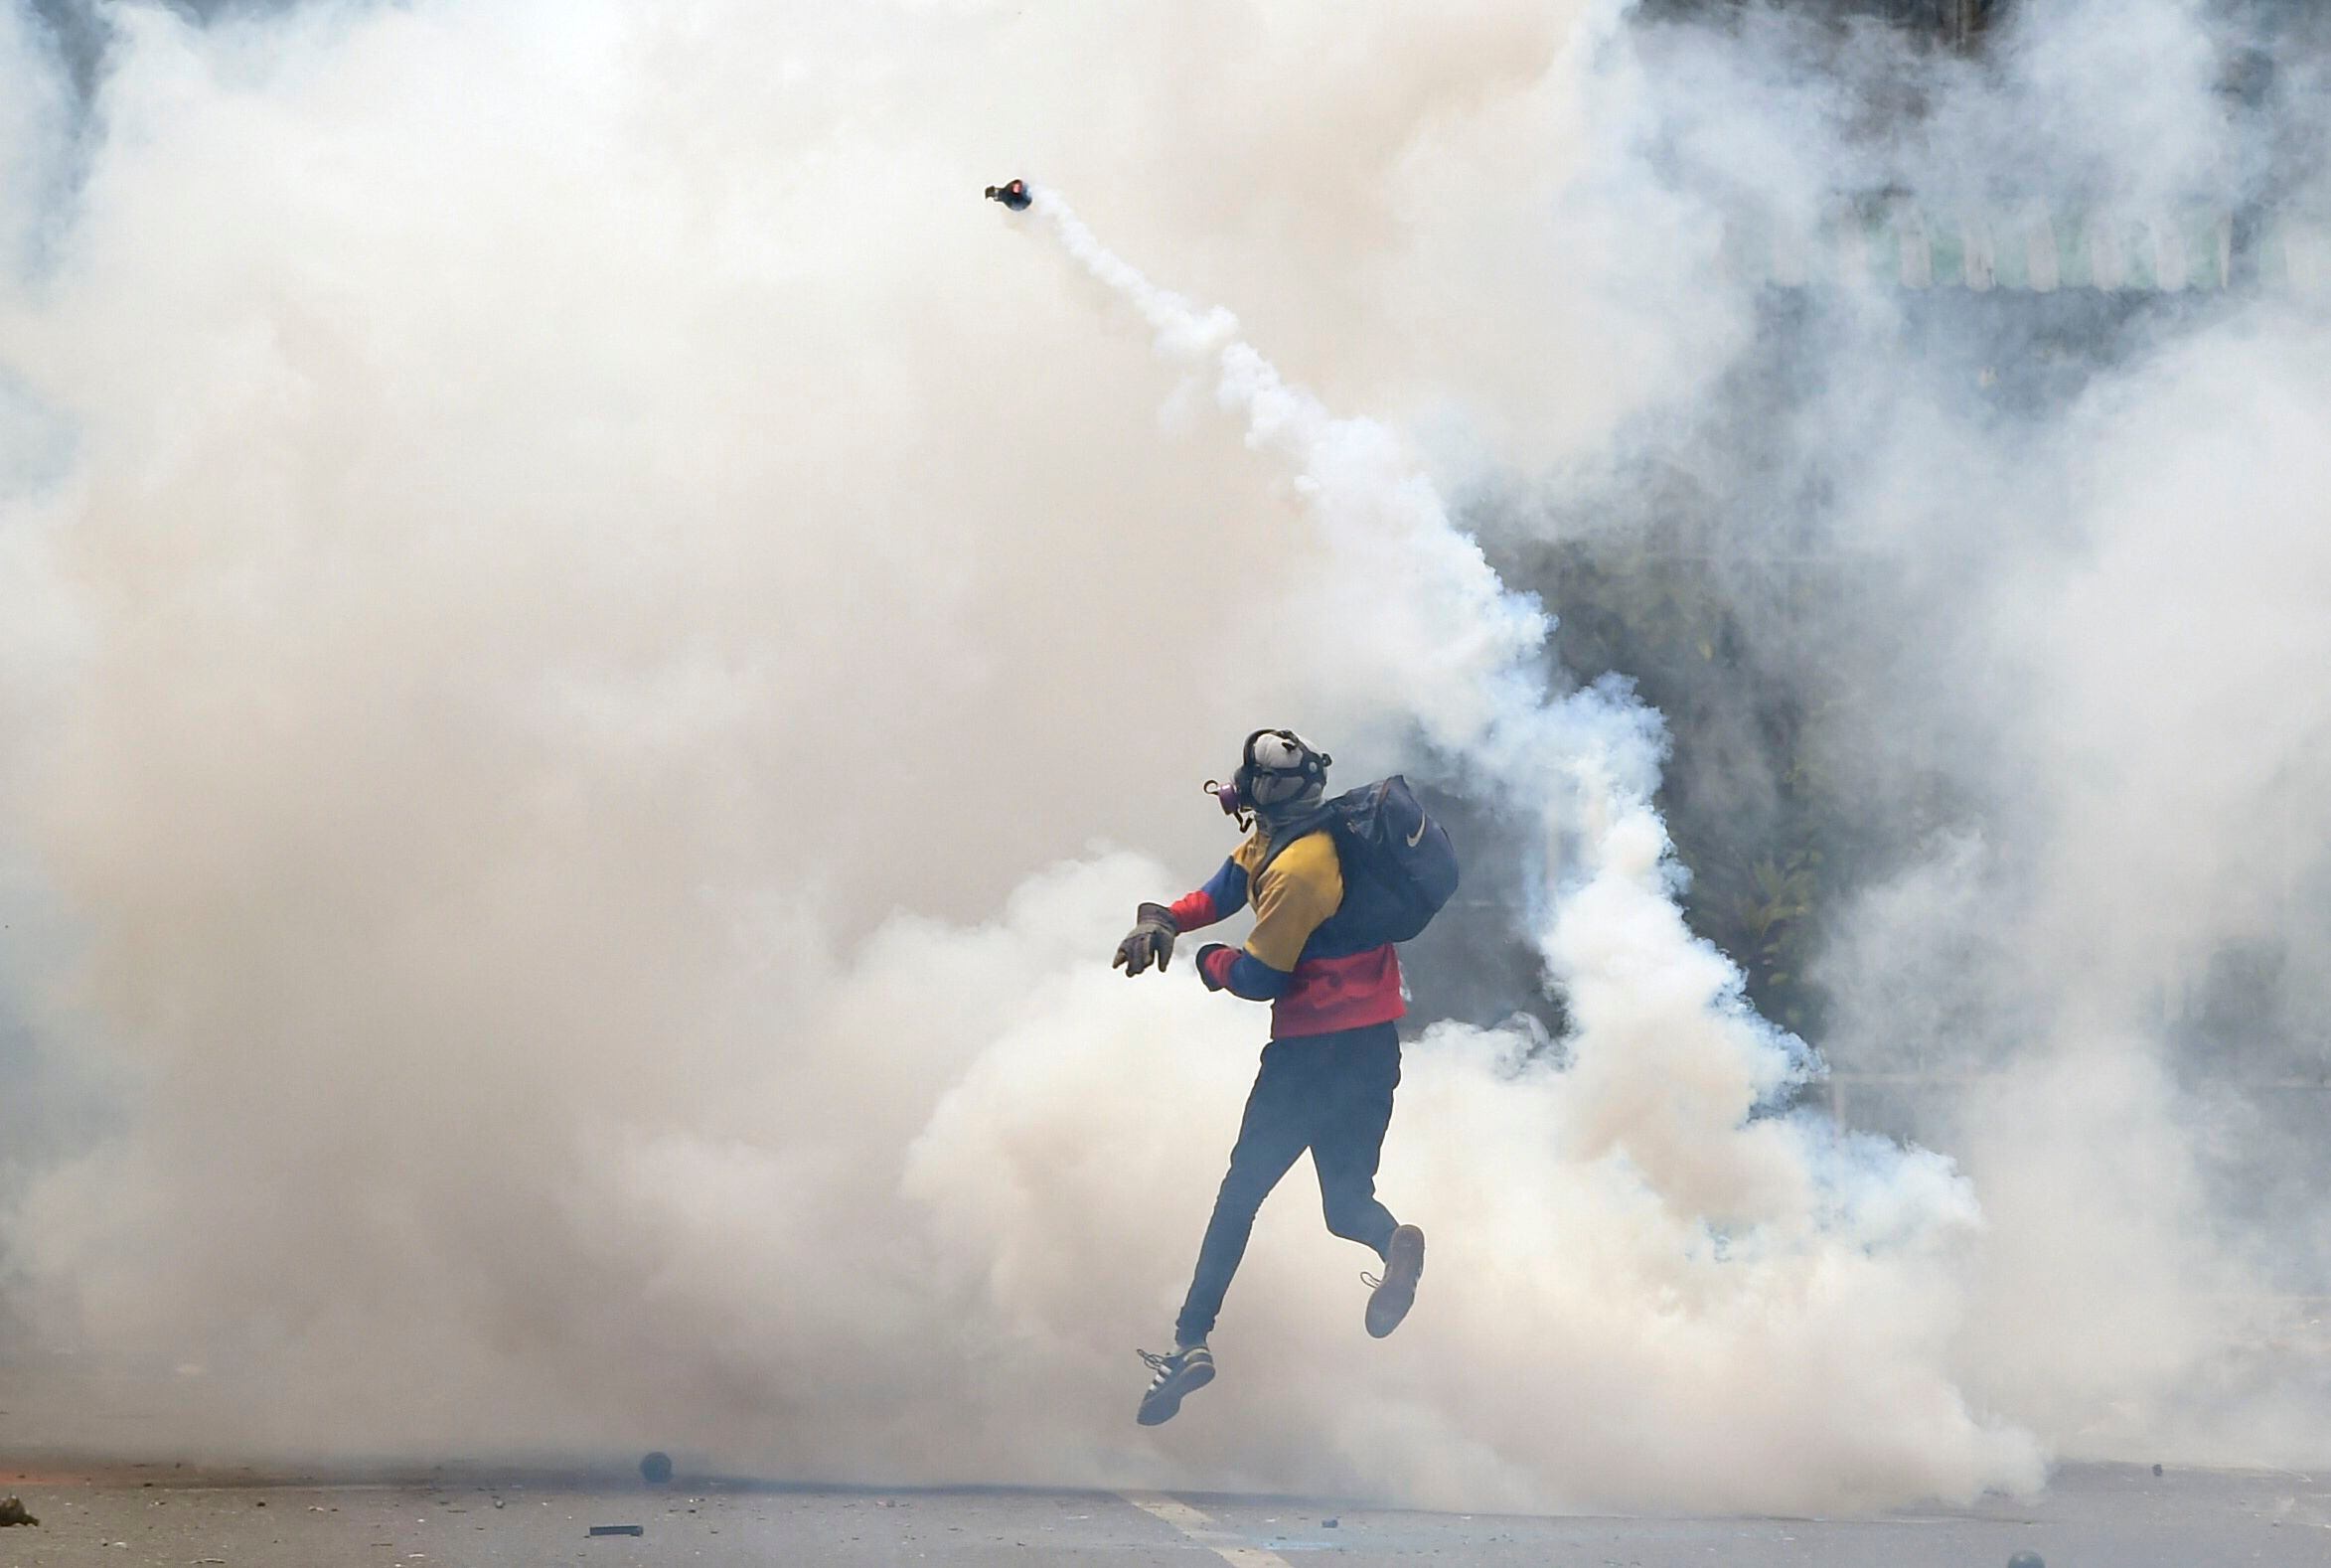 An opposition activist returns tear gas to police as clashes erupt during a protest against President Nicolás Maduro on May 8, 2017. (Photo by JUAN BARRETO/AFP).